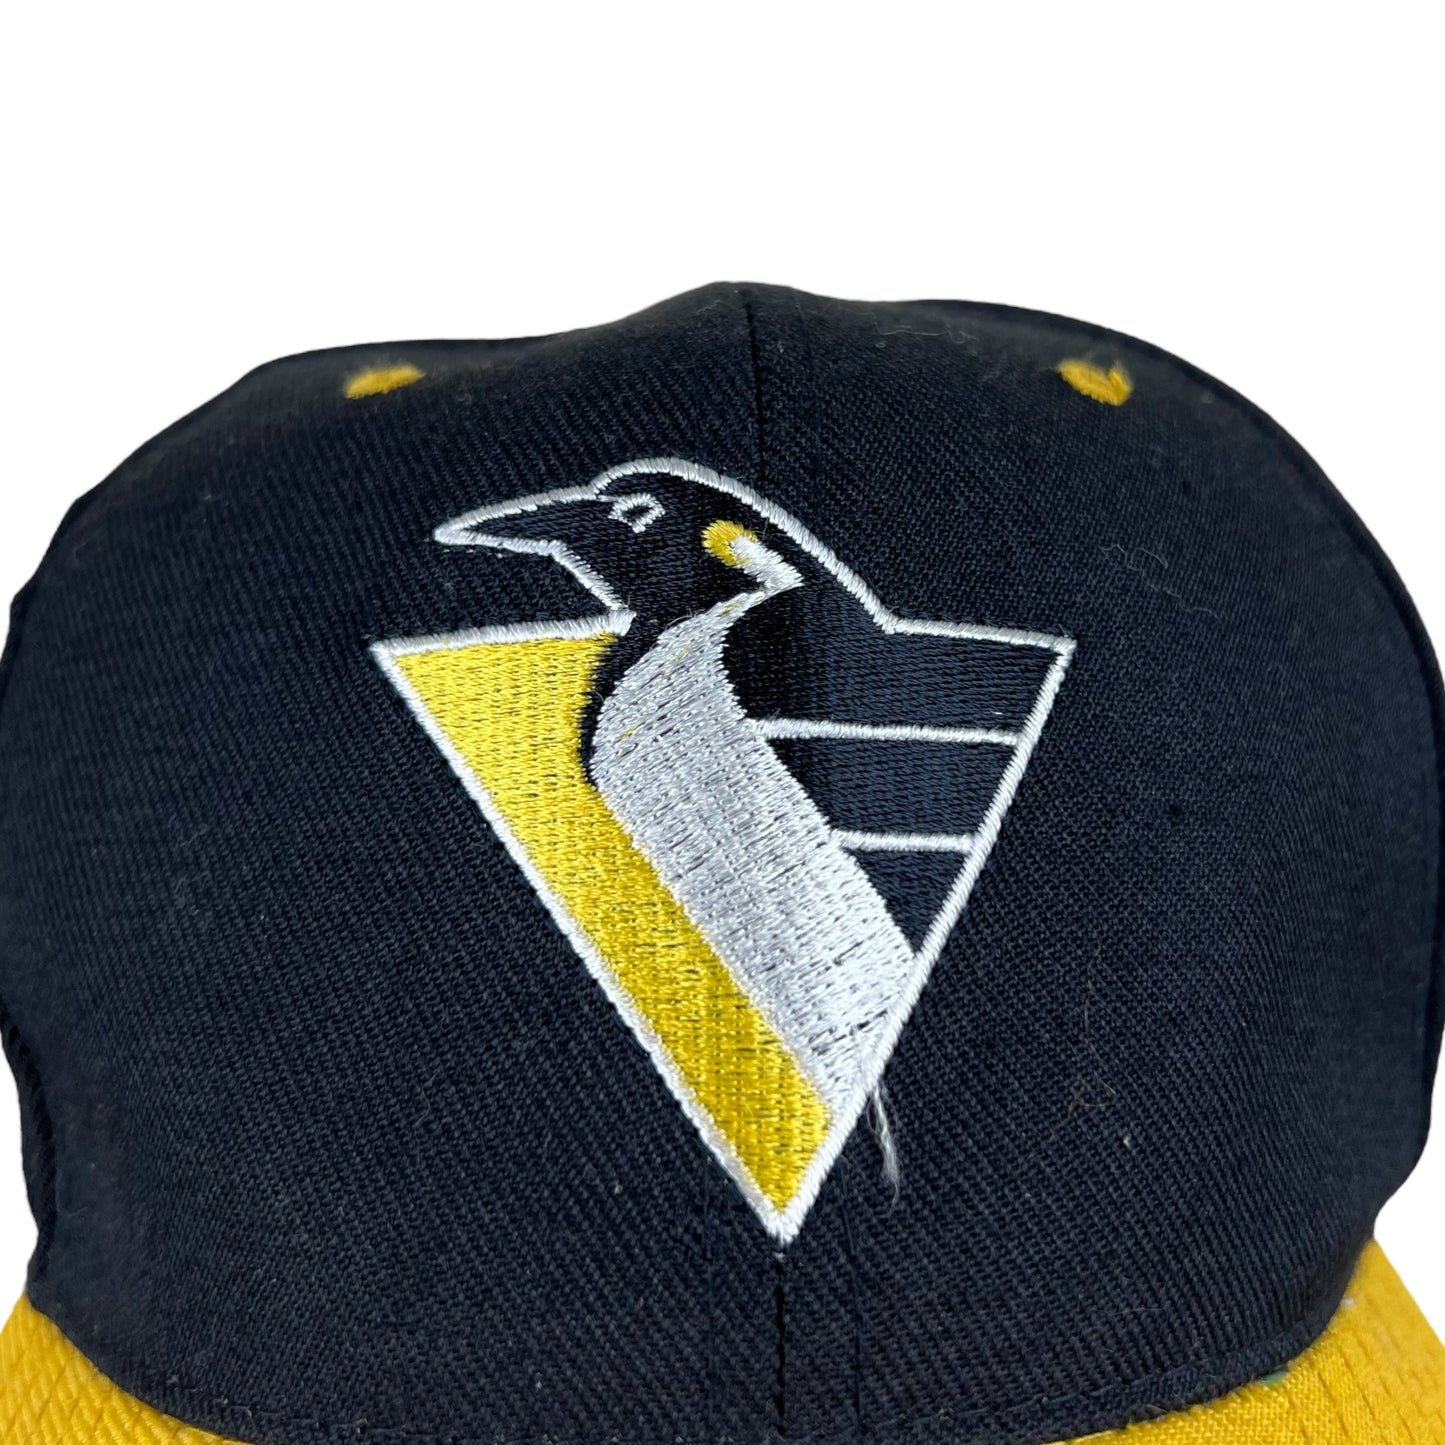 Vintage Pittsburgh Penguins Logo Fitted Hat Black/Yellow